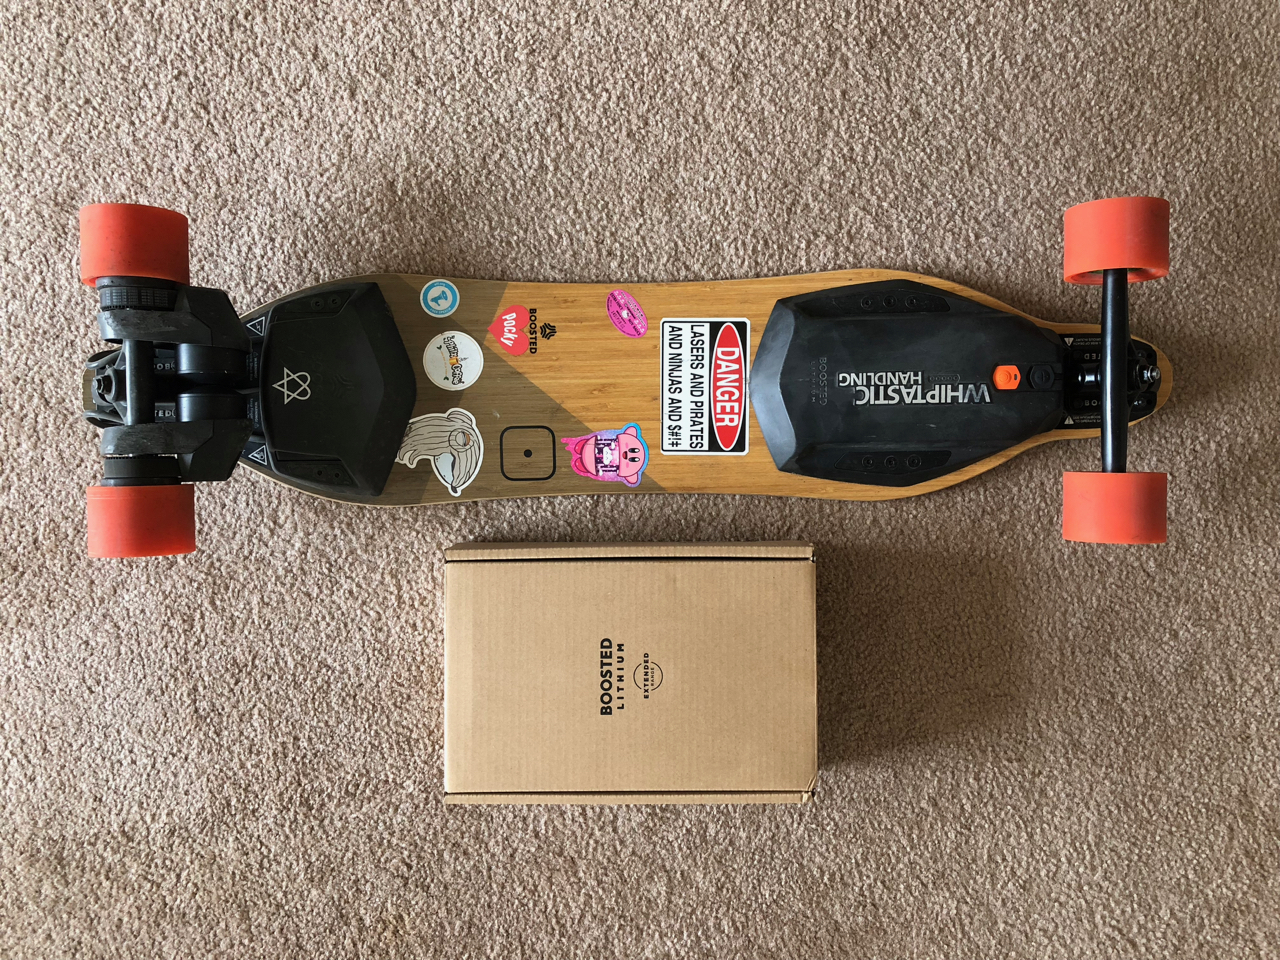 My Boosted Board Next To The Extended Battery Shipping Box